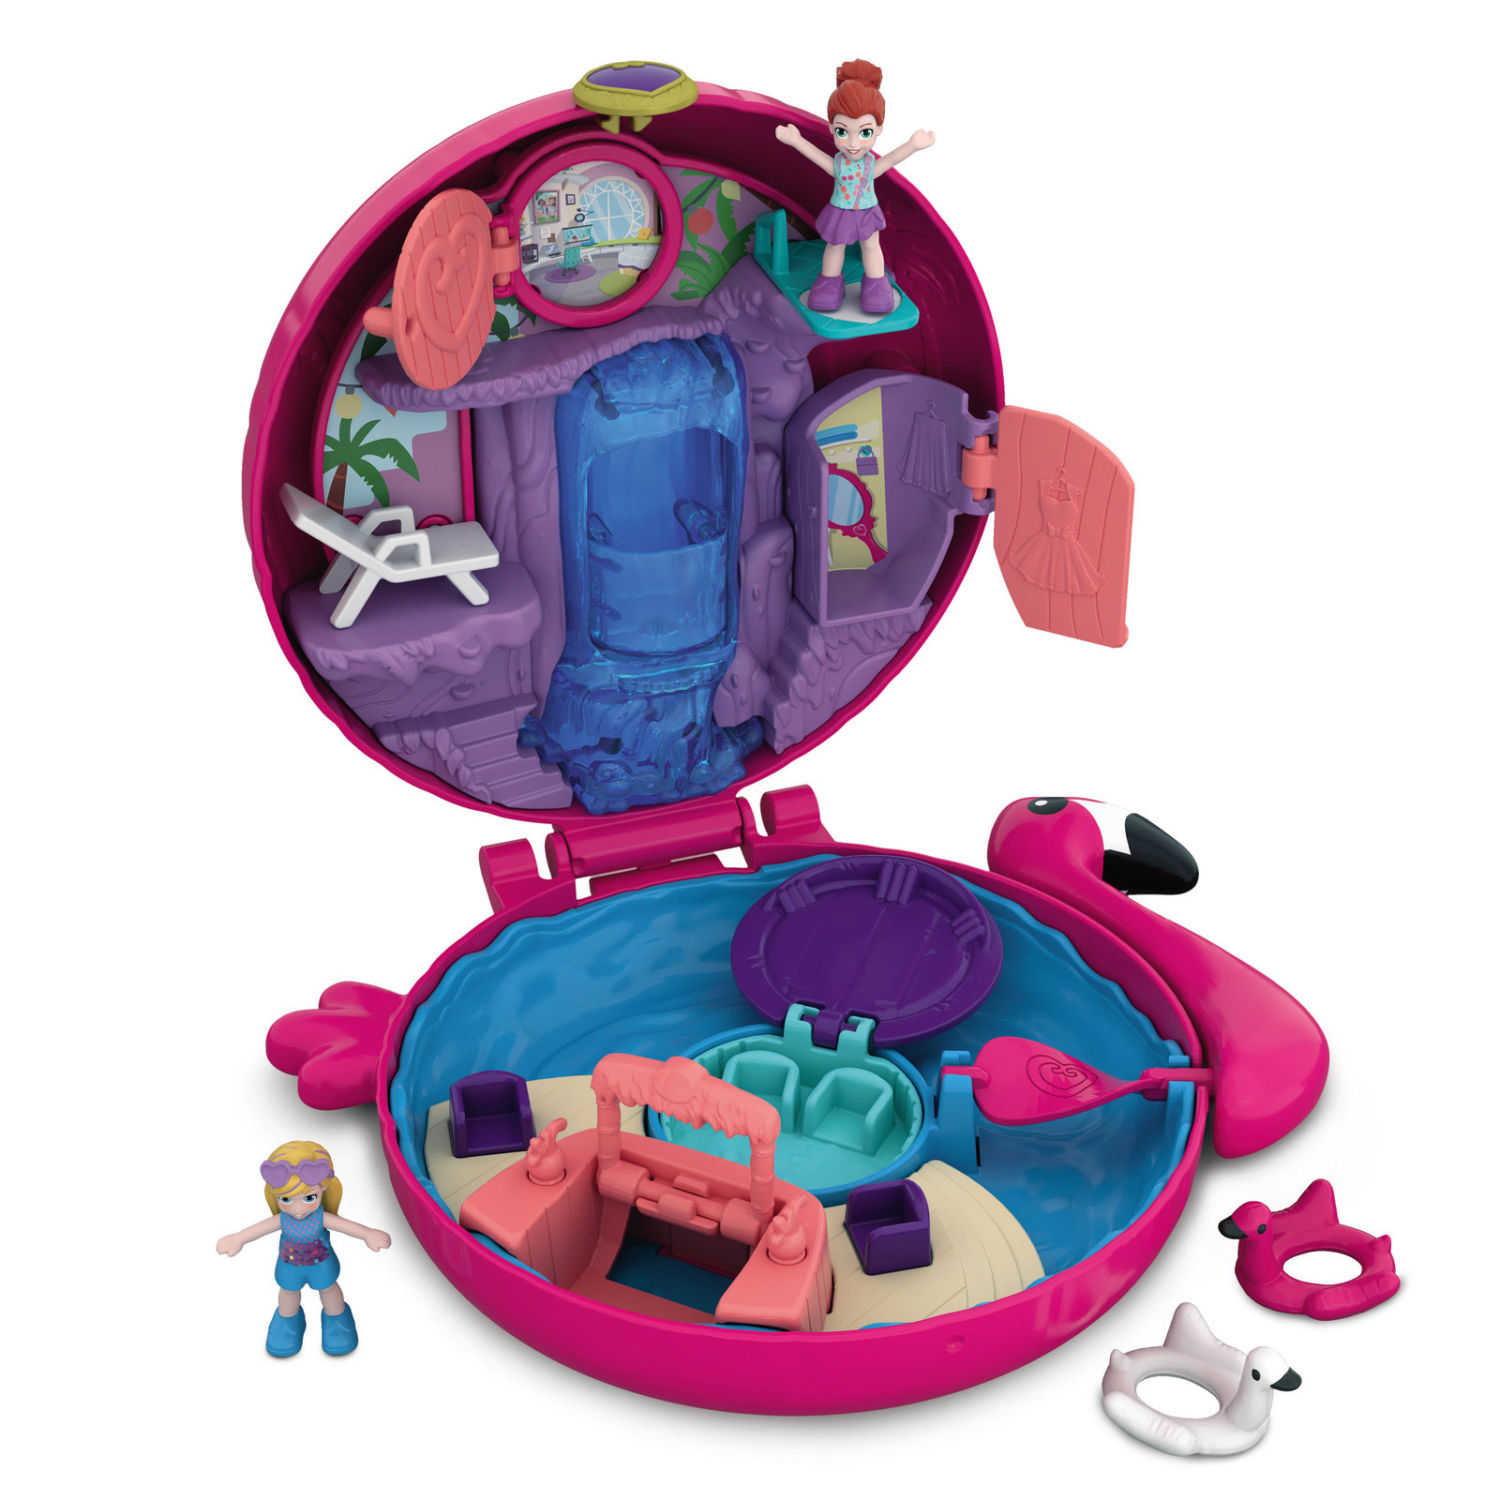 Polly Pocket Tiny Places Heart World Picnic Compact Mattel Toy Play Set Kid Gift 